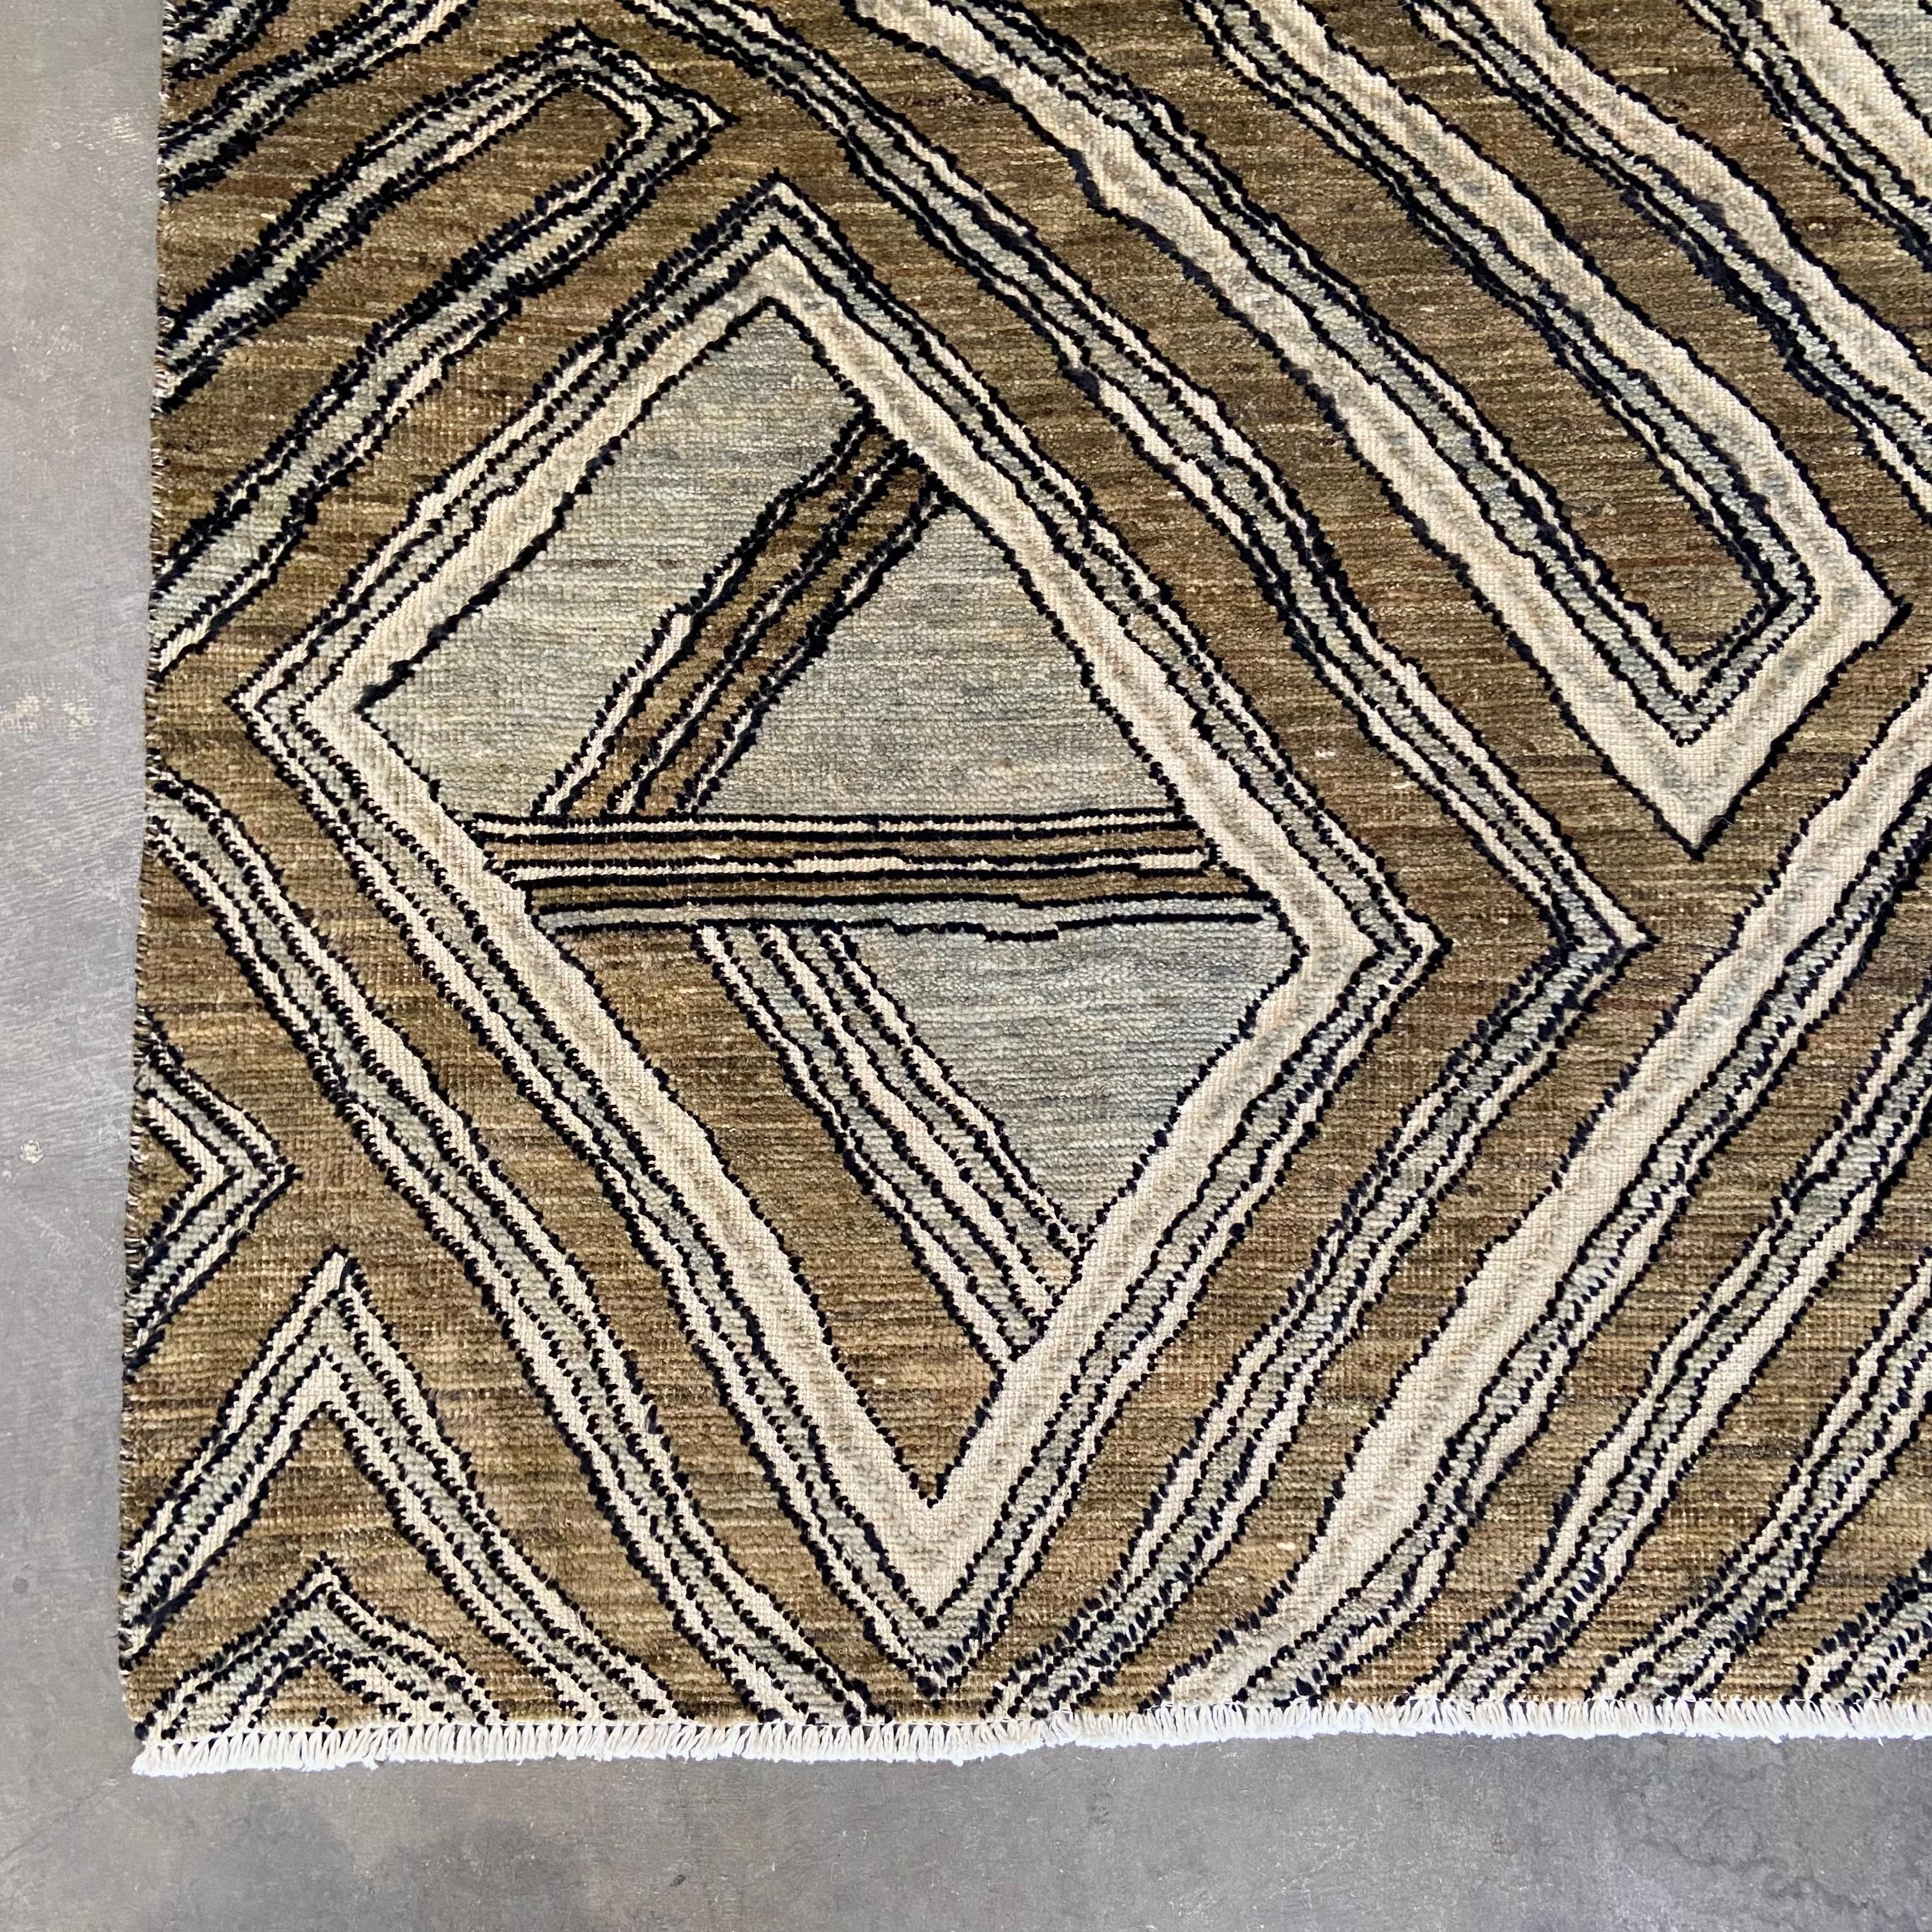 Custom wool modern rug 
Made in turkey
Colors: Coal, Gray, Brown, and light oatmeal.
Size 8x10.
 